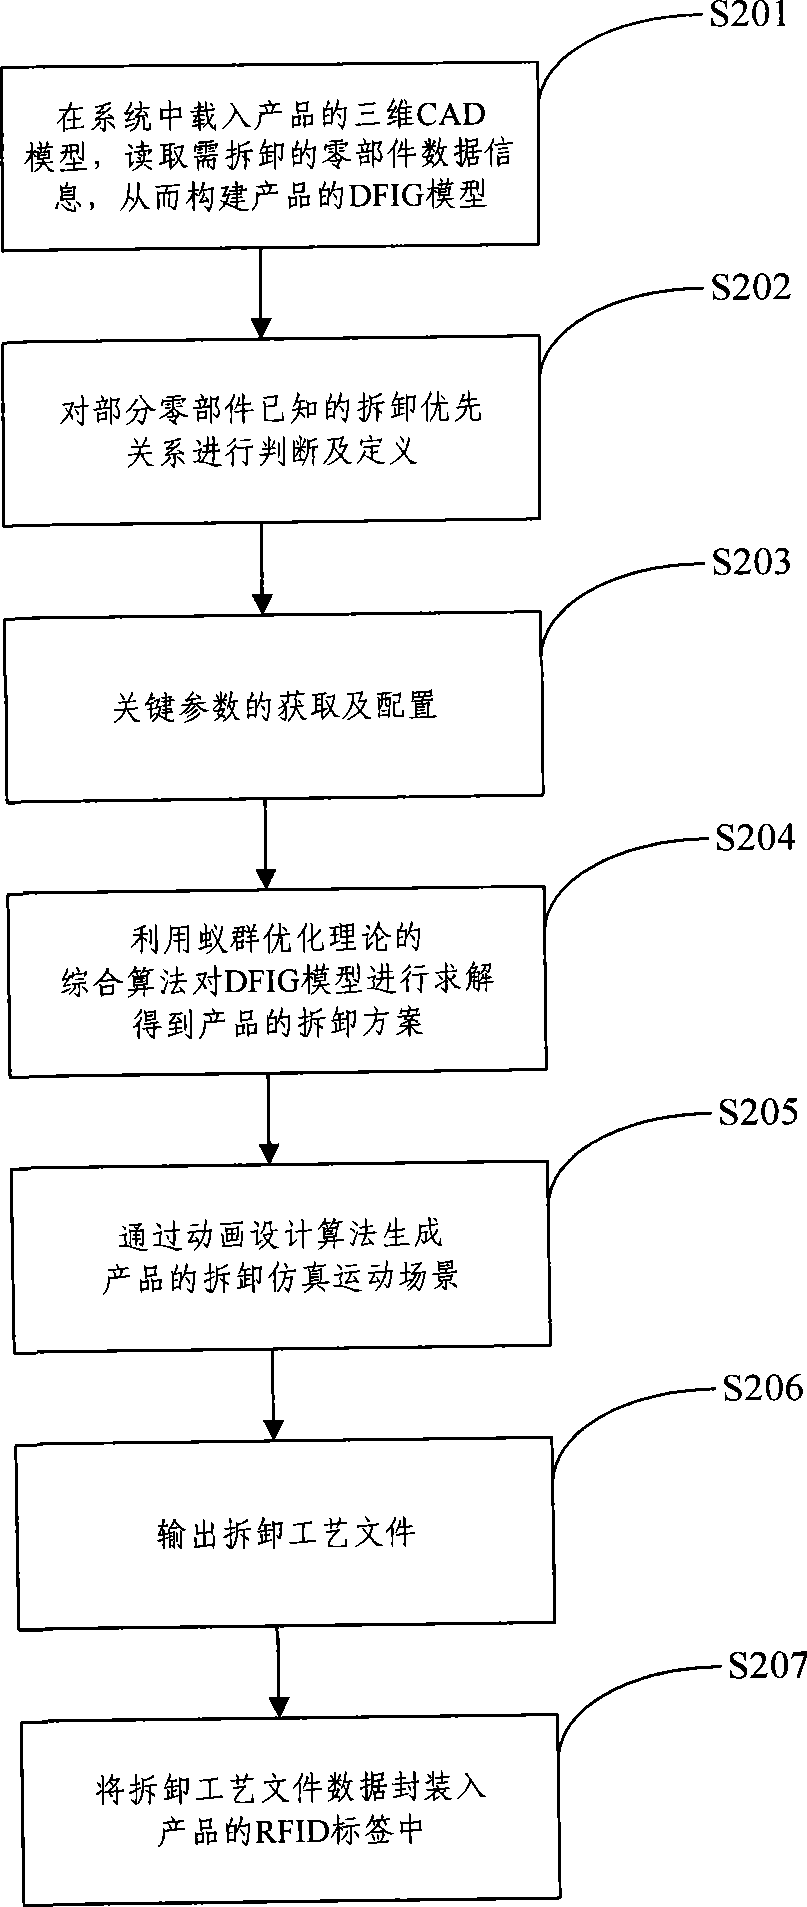 Method and system for mechanical and electrical disassembly planning and disassembly information management